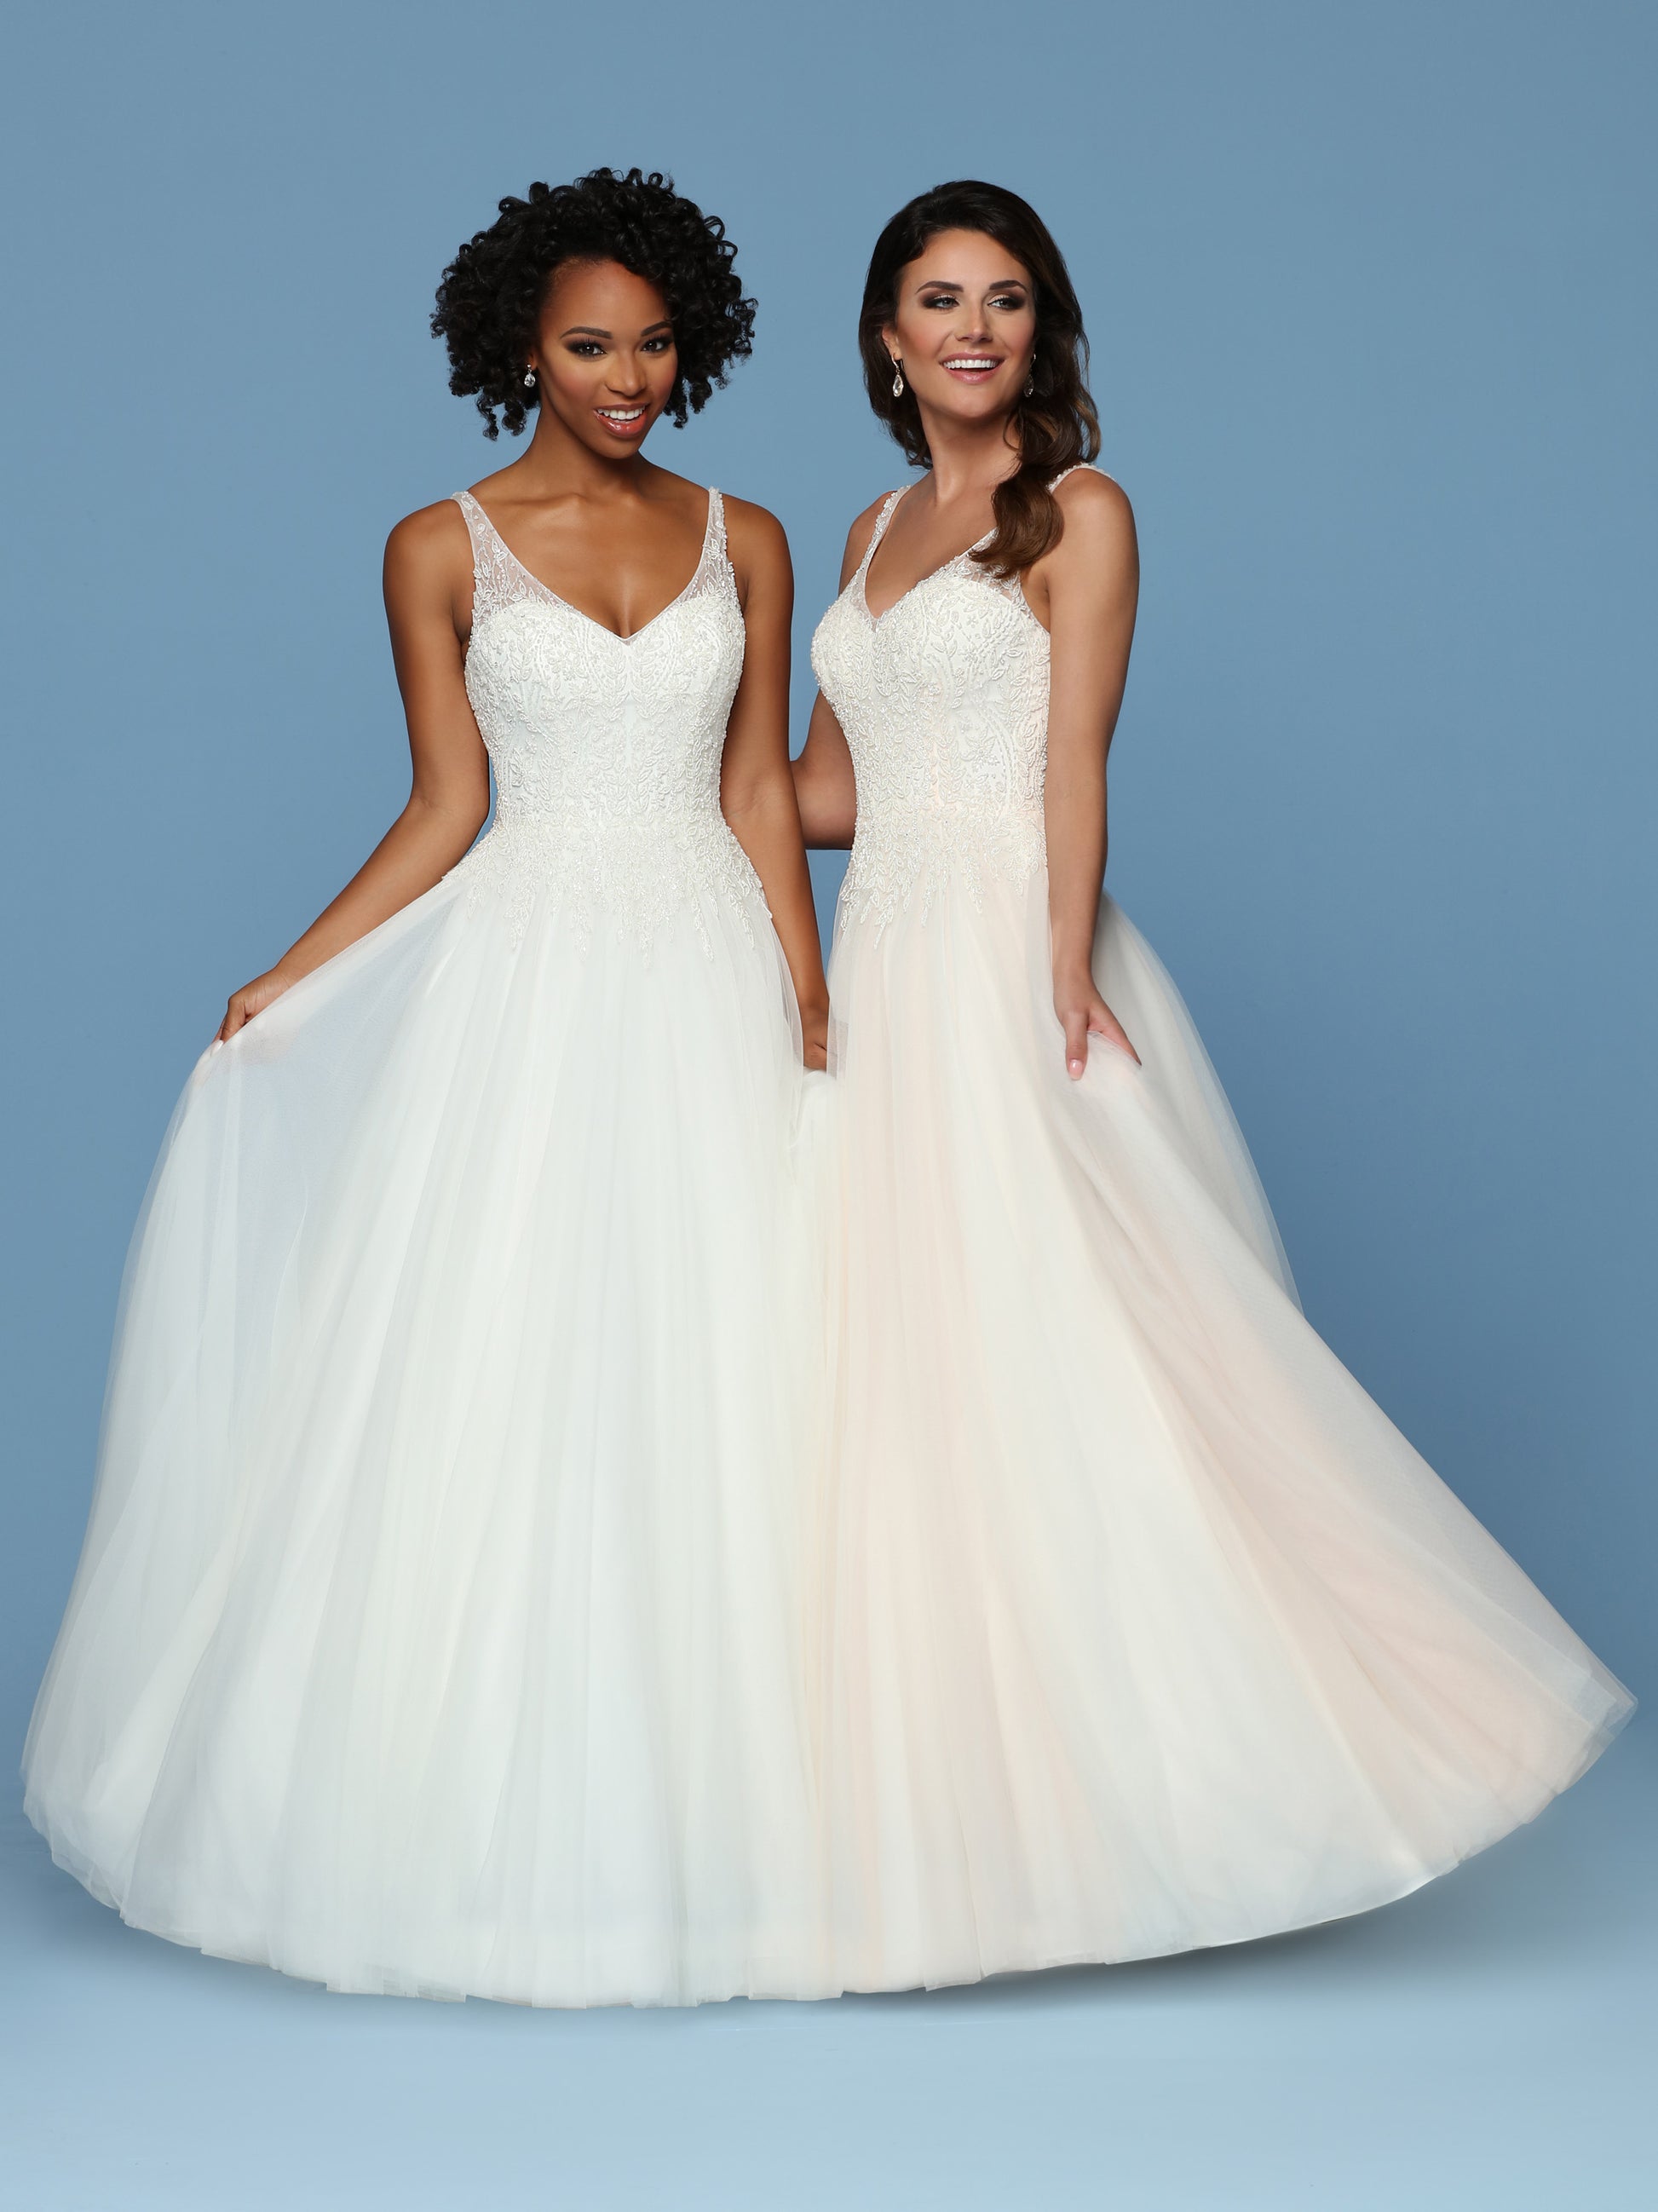 Davinci Bridal 50544 is a Beautiful Lush Soft Tulle A Line Ball Gown with a Hand Embellished Bodice cascading into to tulle skirt. Sweetheart Neckline with a sheer Illusion V Neck and straps leading around to an open V back.  Available for 1-2 Week Delivery!!!  Available Sizes: 2,4,6,8,10,12,14,16,18,20  Available Colors: Ivory/Blush, Ivory/Ivory